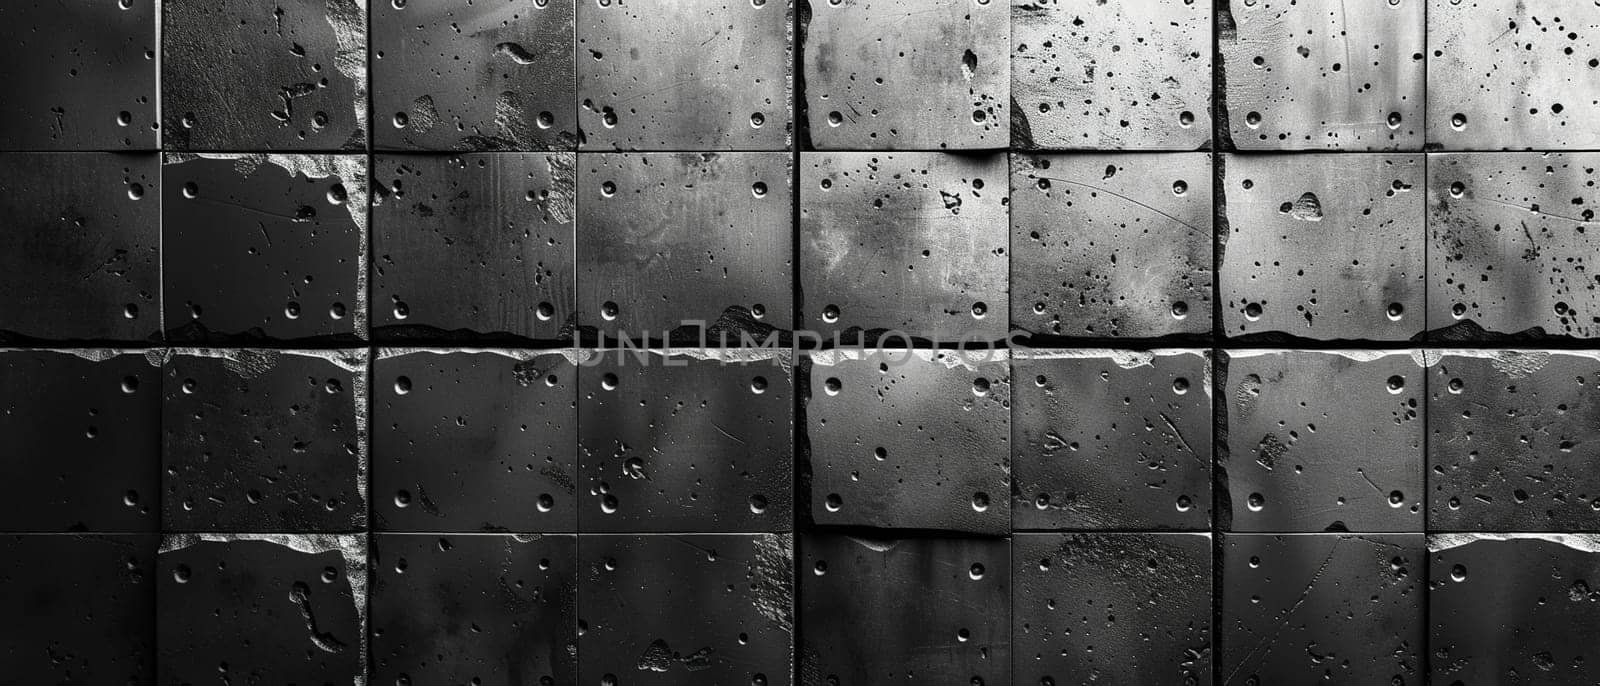 Rough concrete wall texture, suitable for urban and modern background designs.